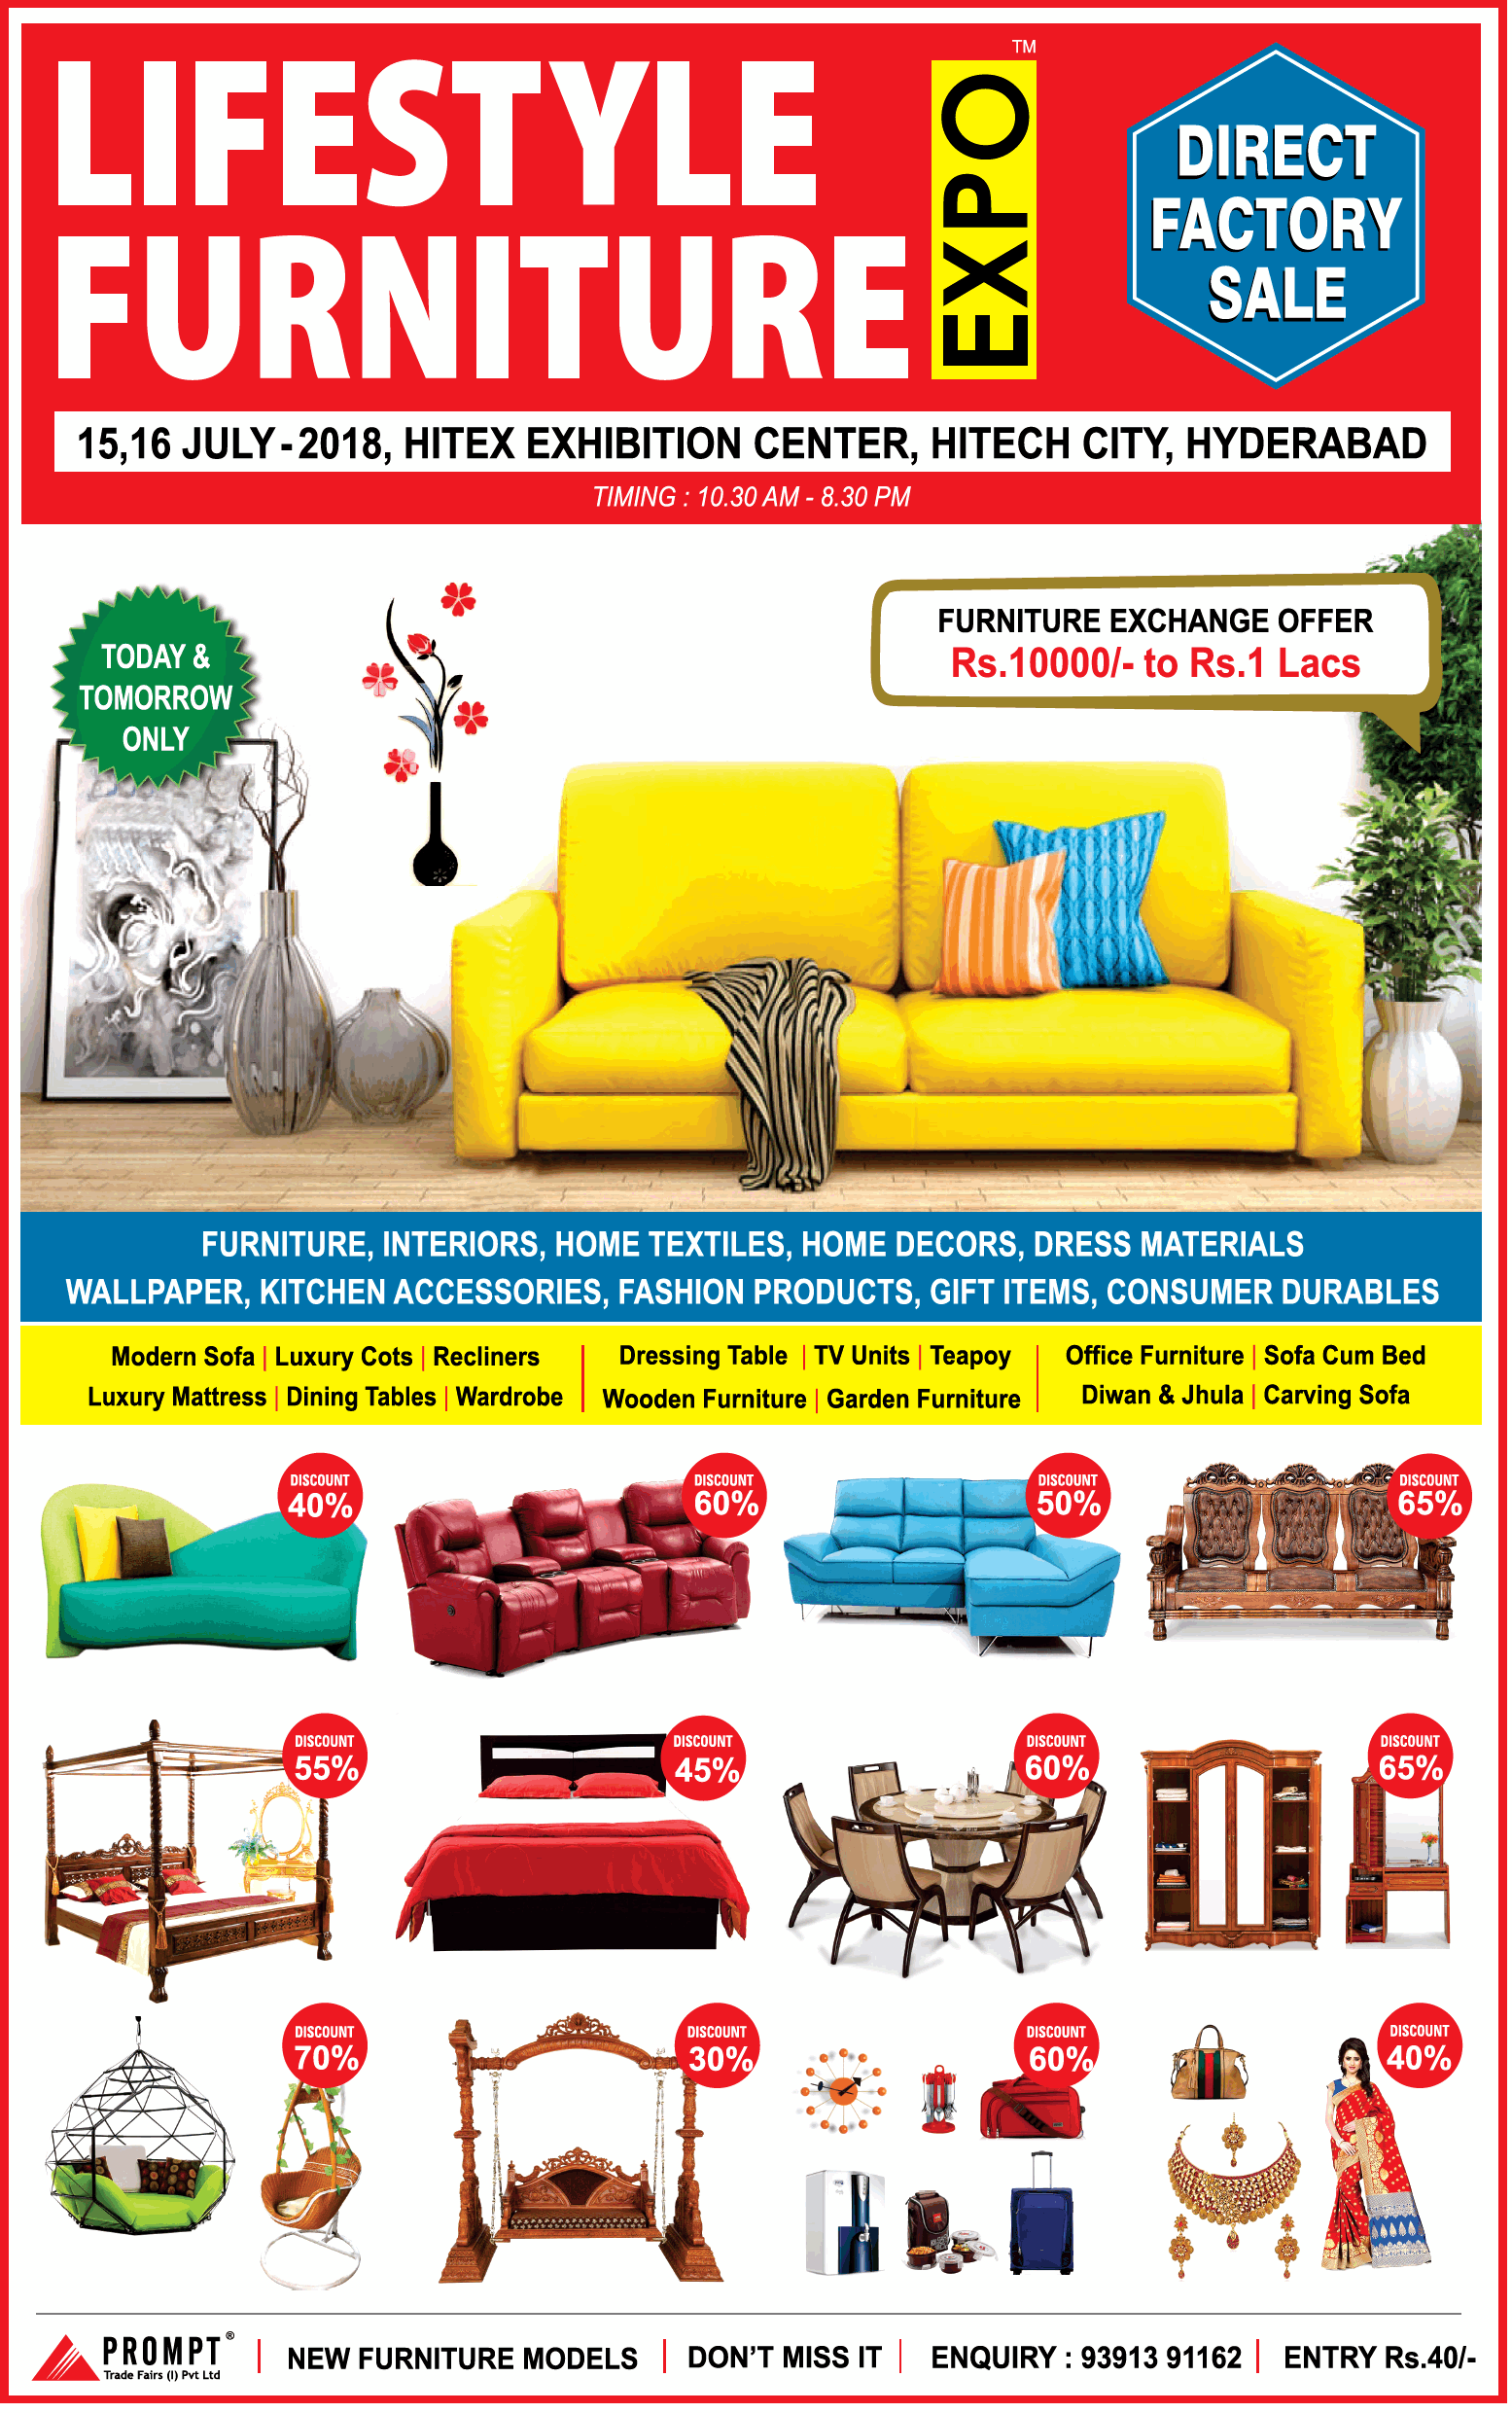 Lifestyle Furniture Expo Direct Factory Sale Ad Advert Gallery